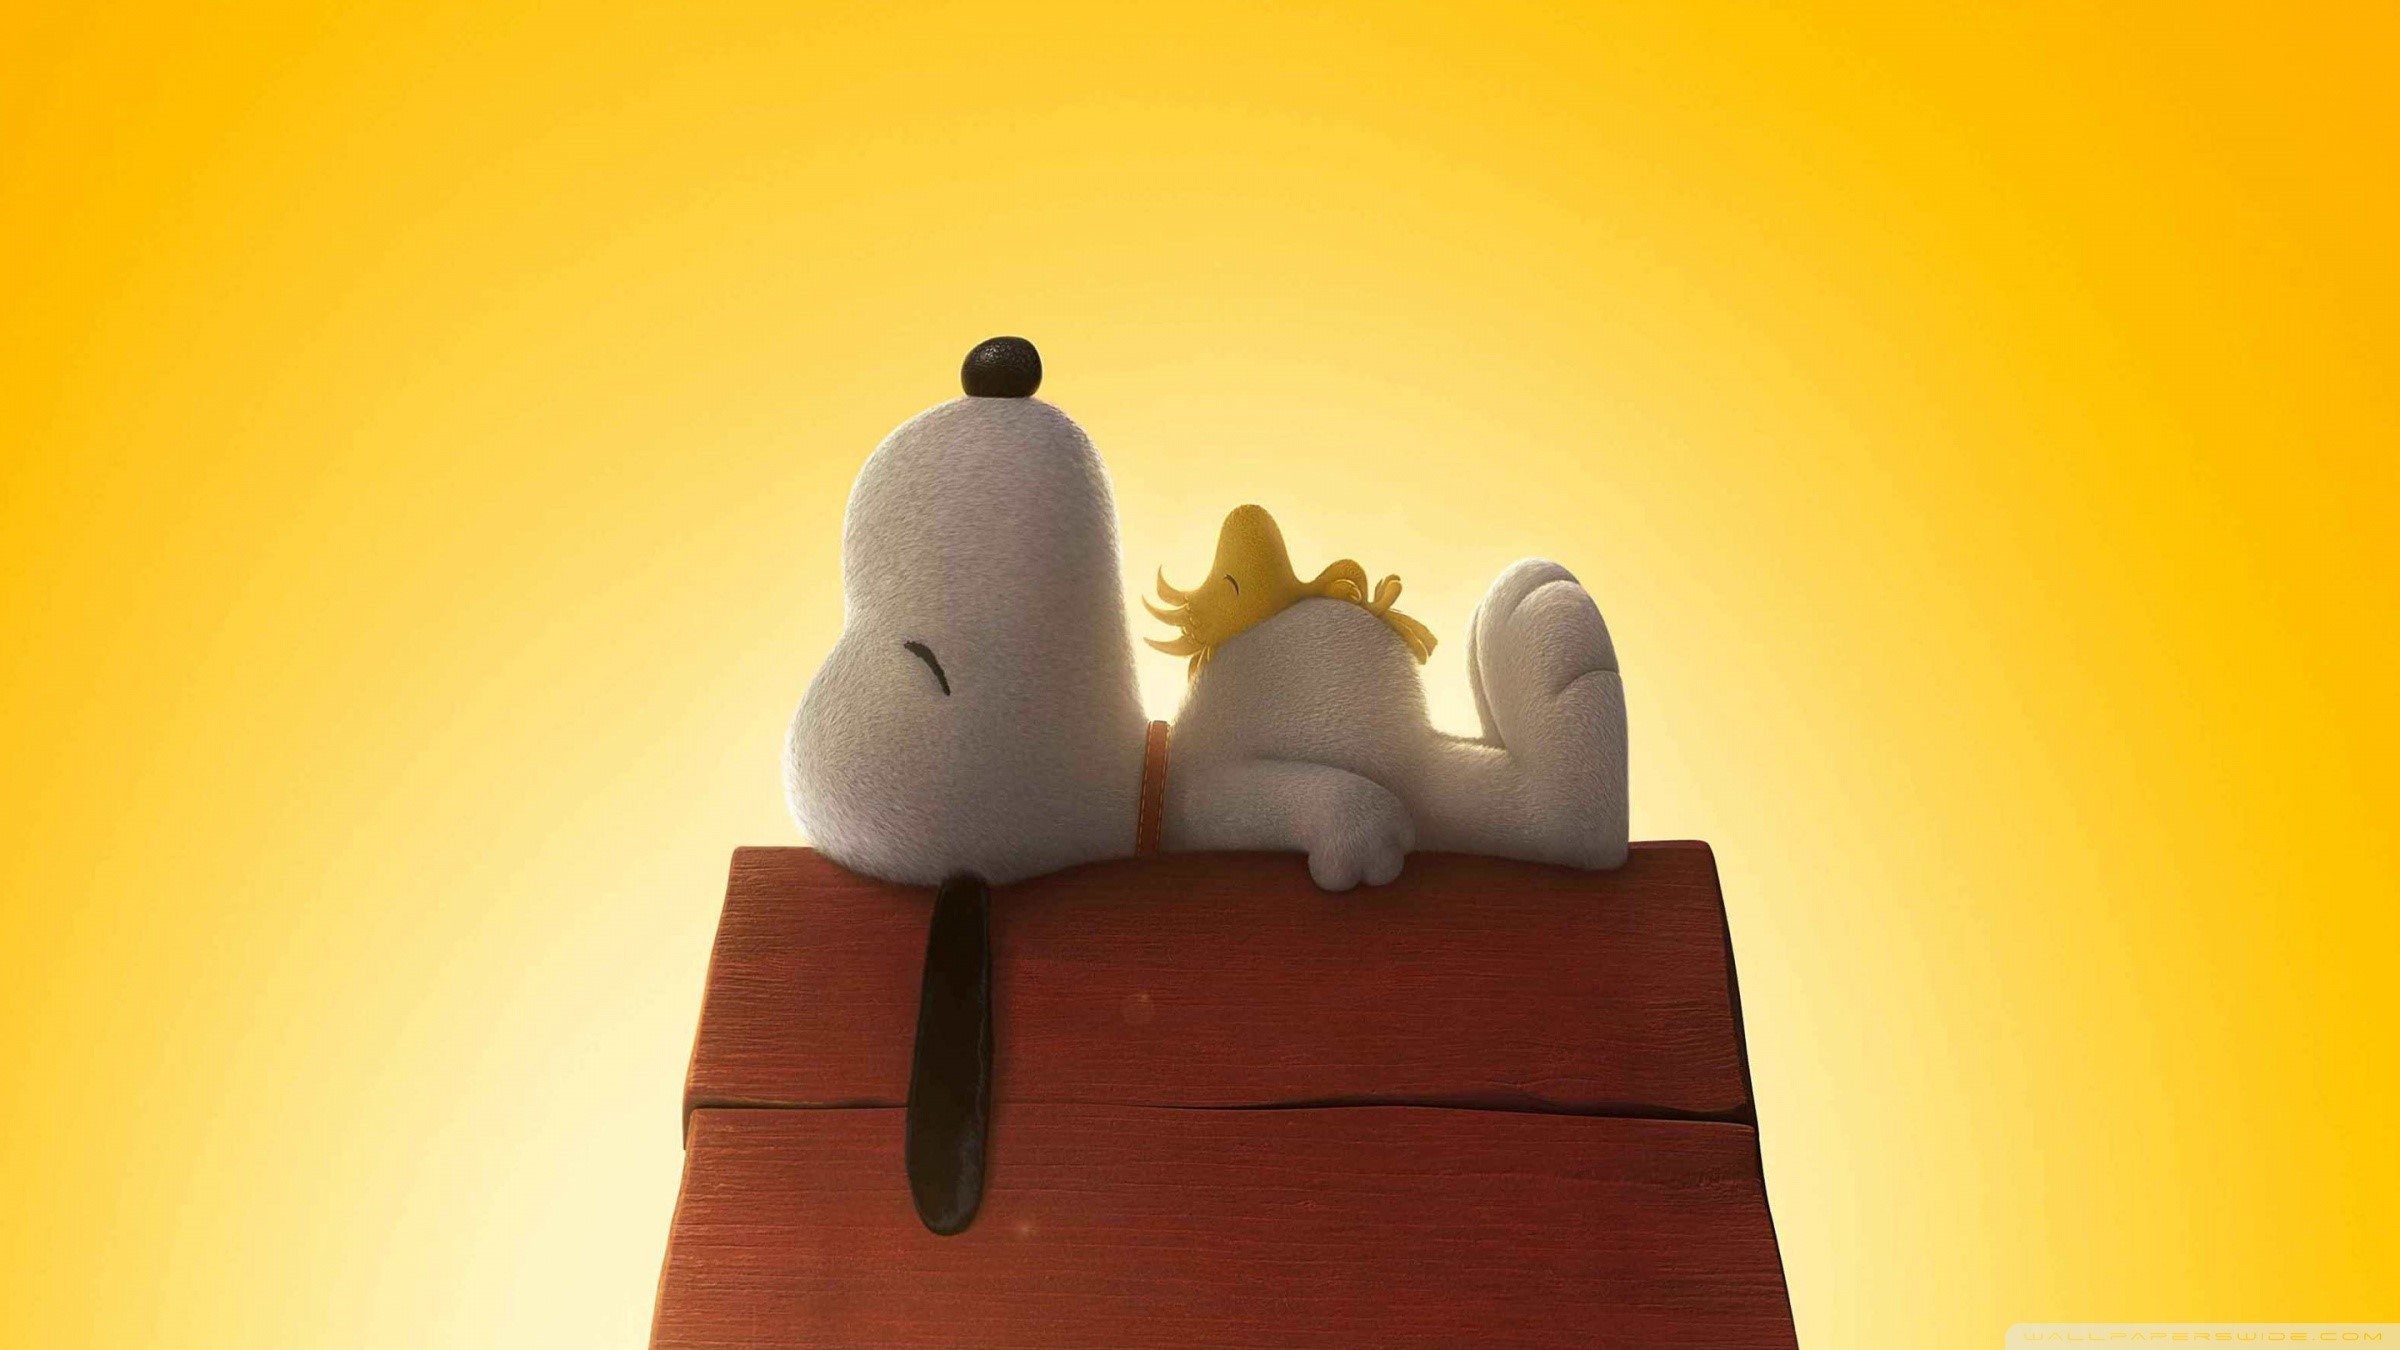 Snoopy and Charlie Brown: Peanuts Wallpaper ID:2143